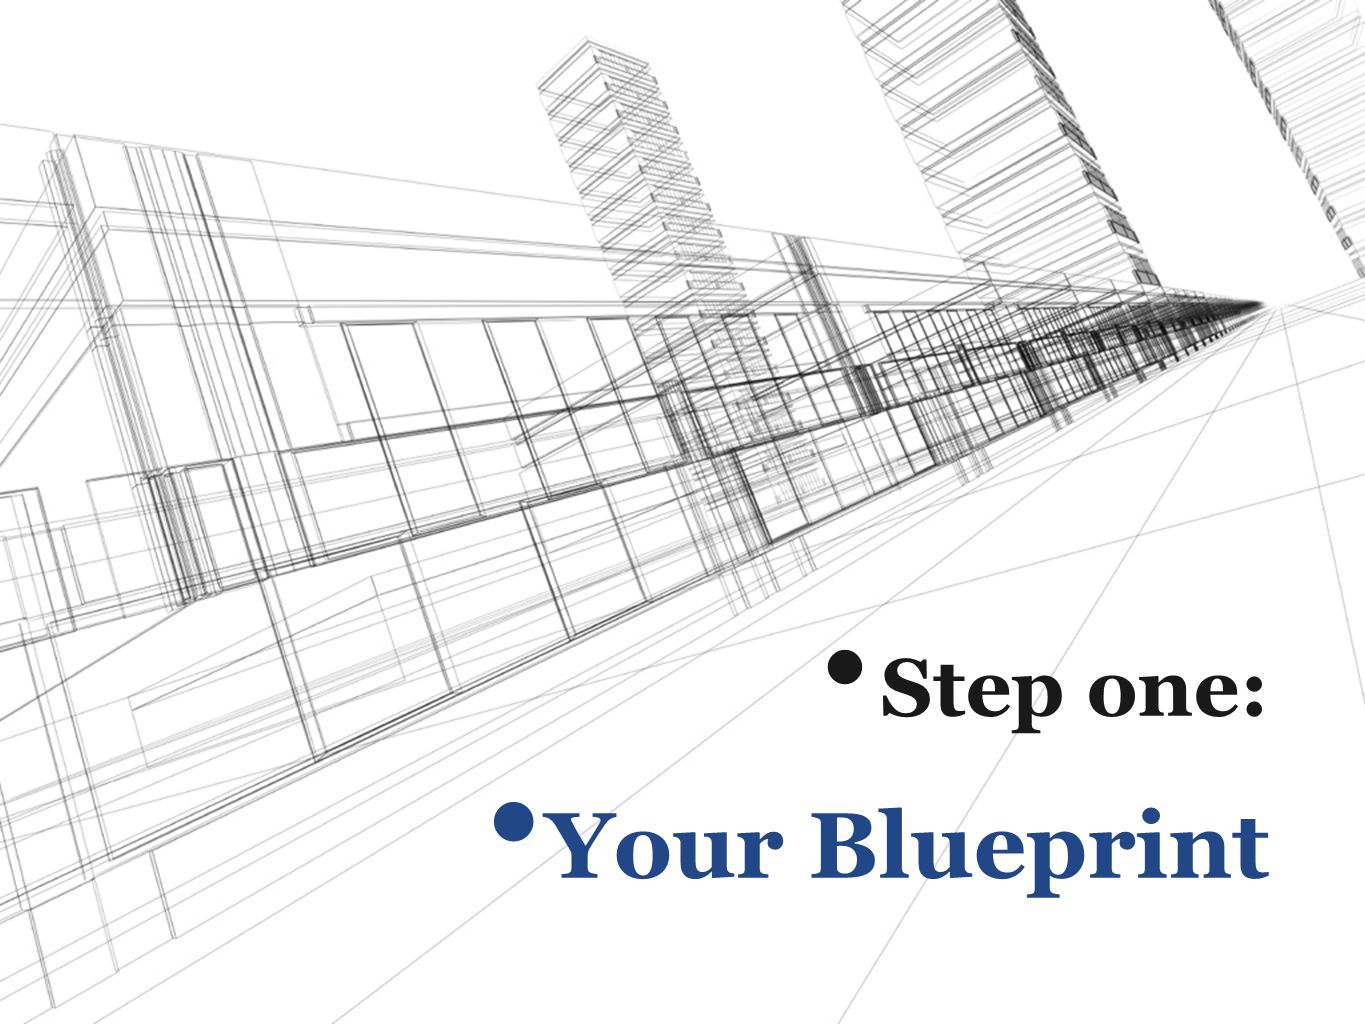 Step one: Your Blueprint